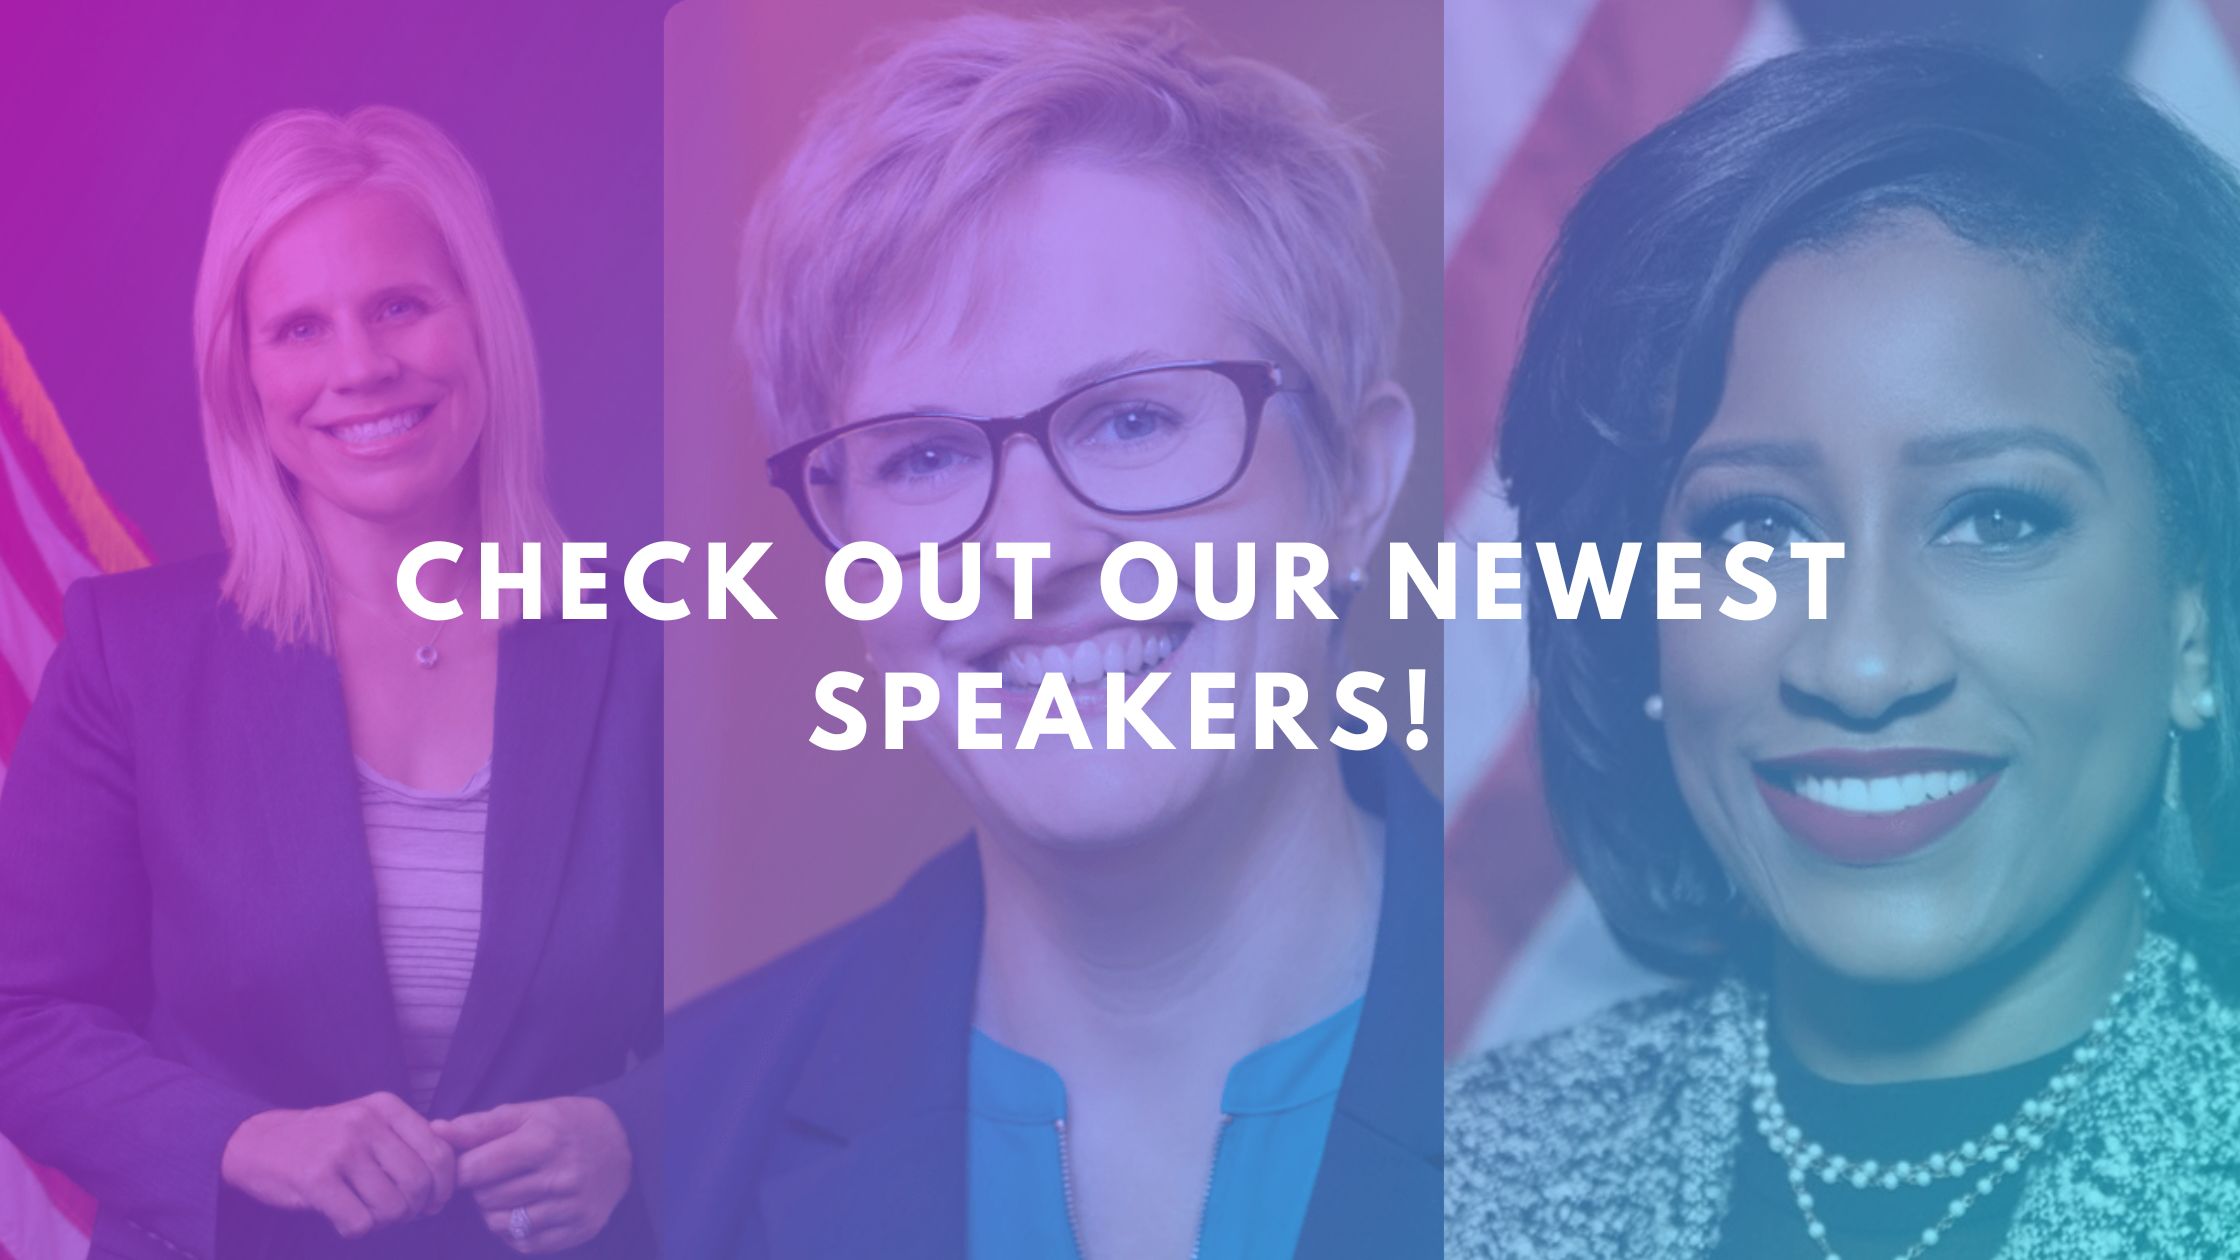 Check out our newest speakers!